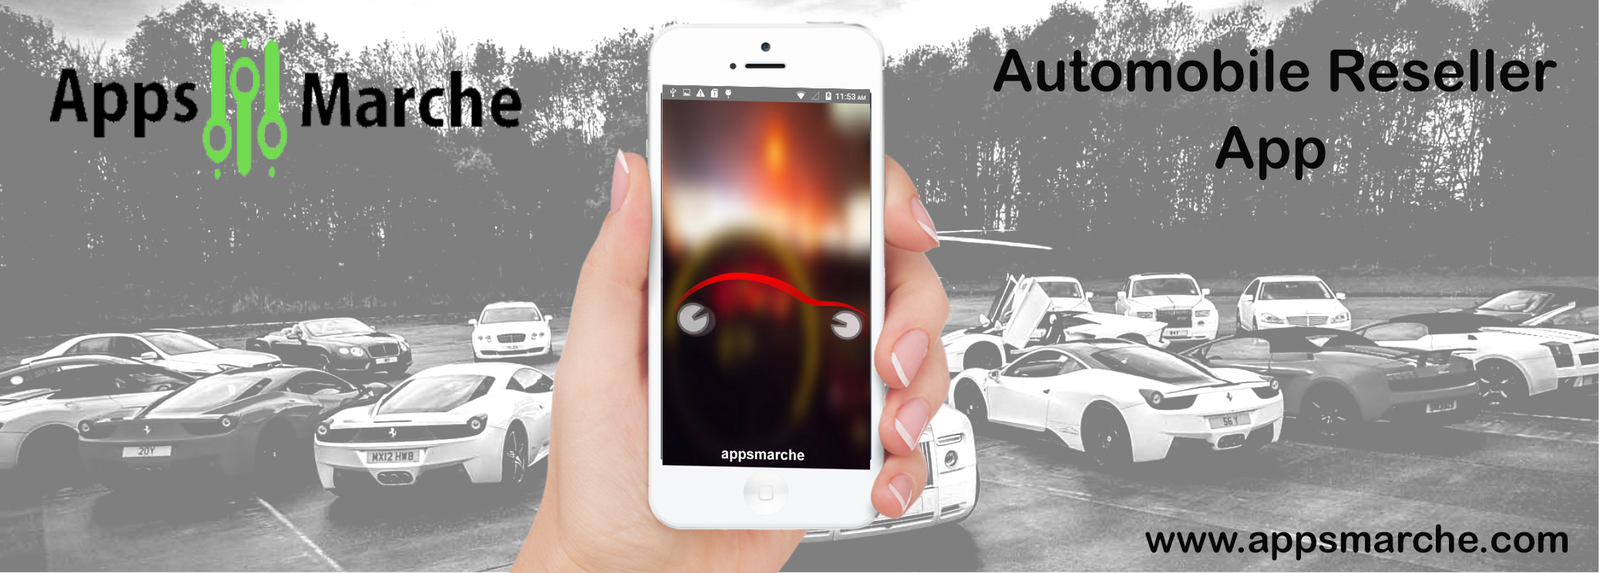 automobile reseller best app for used cars,automobile app, best automobile app,mobile app builder